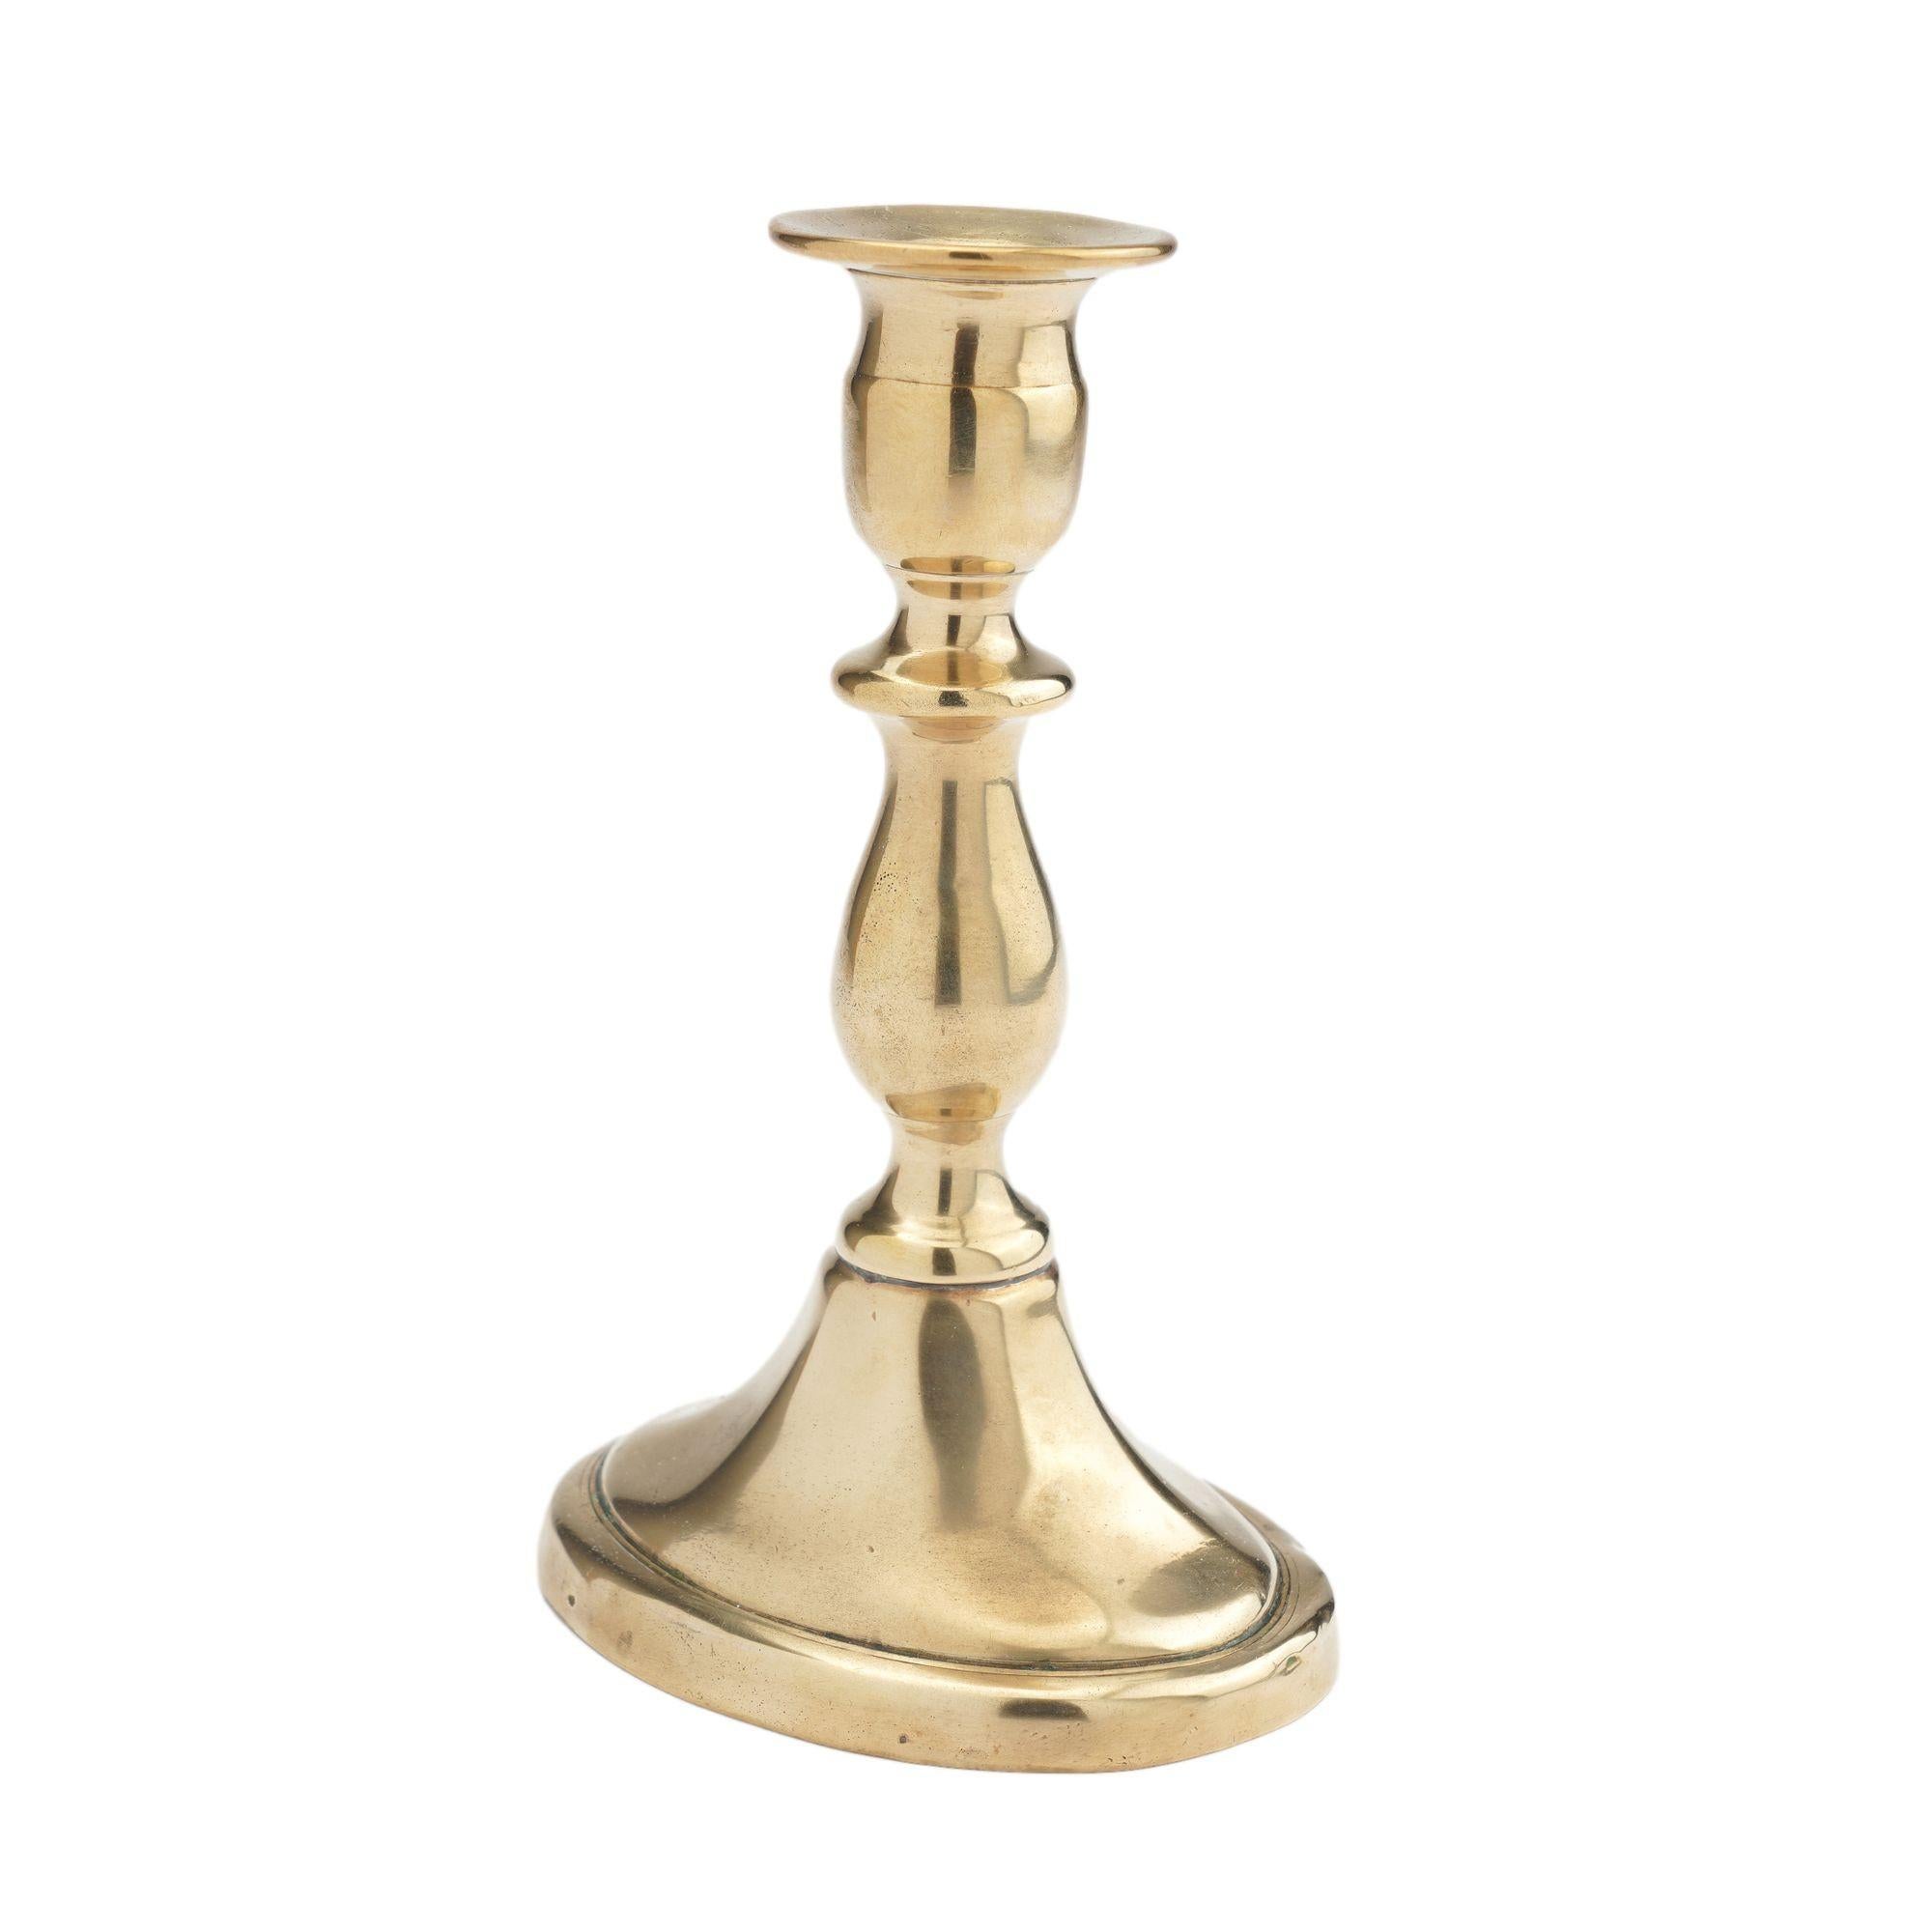 Rare oval base, core cast brass candlestick with baluster shaft and urn form candle cup with bobesh. The candle shaft retains its original push up candle ejector and the underside of the base bears the initial 